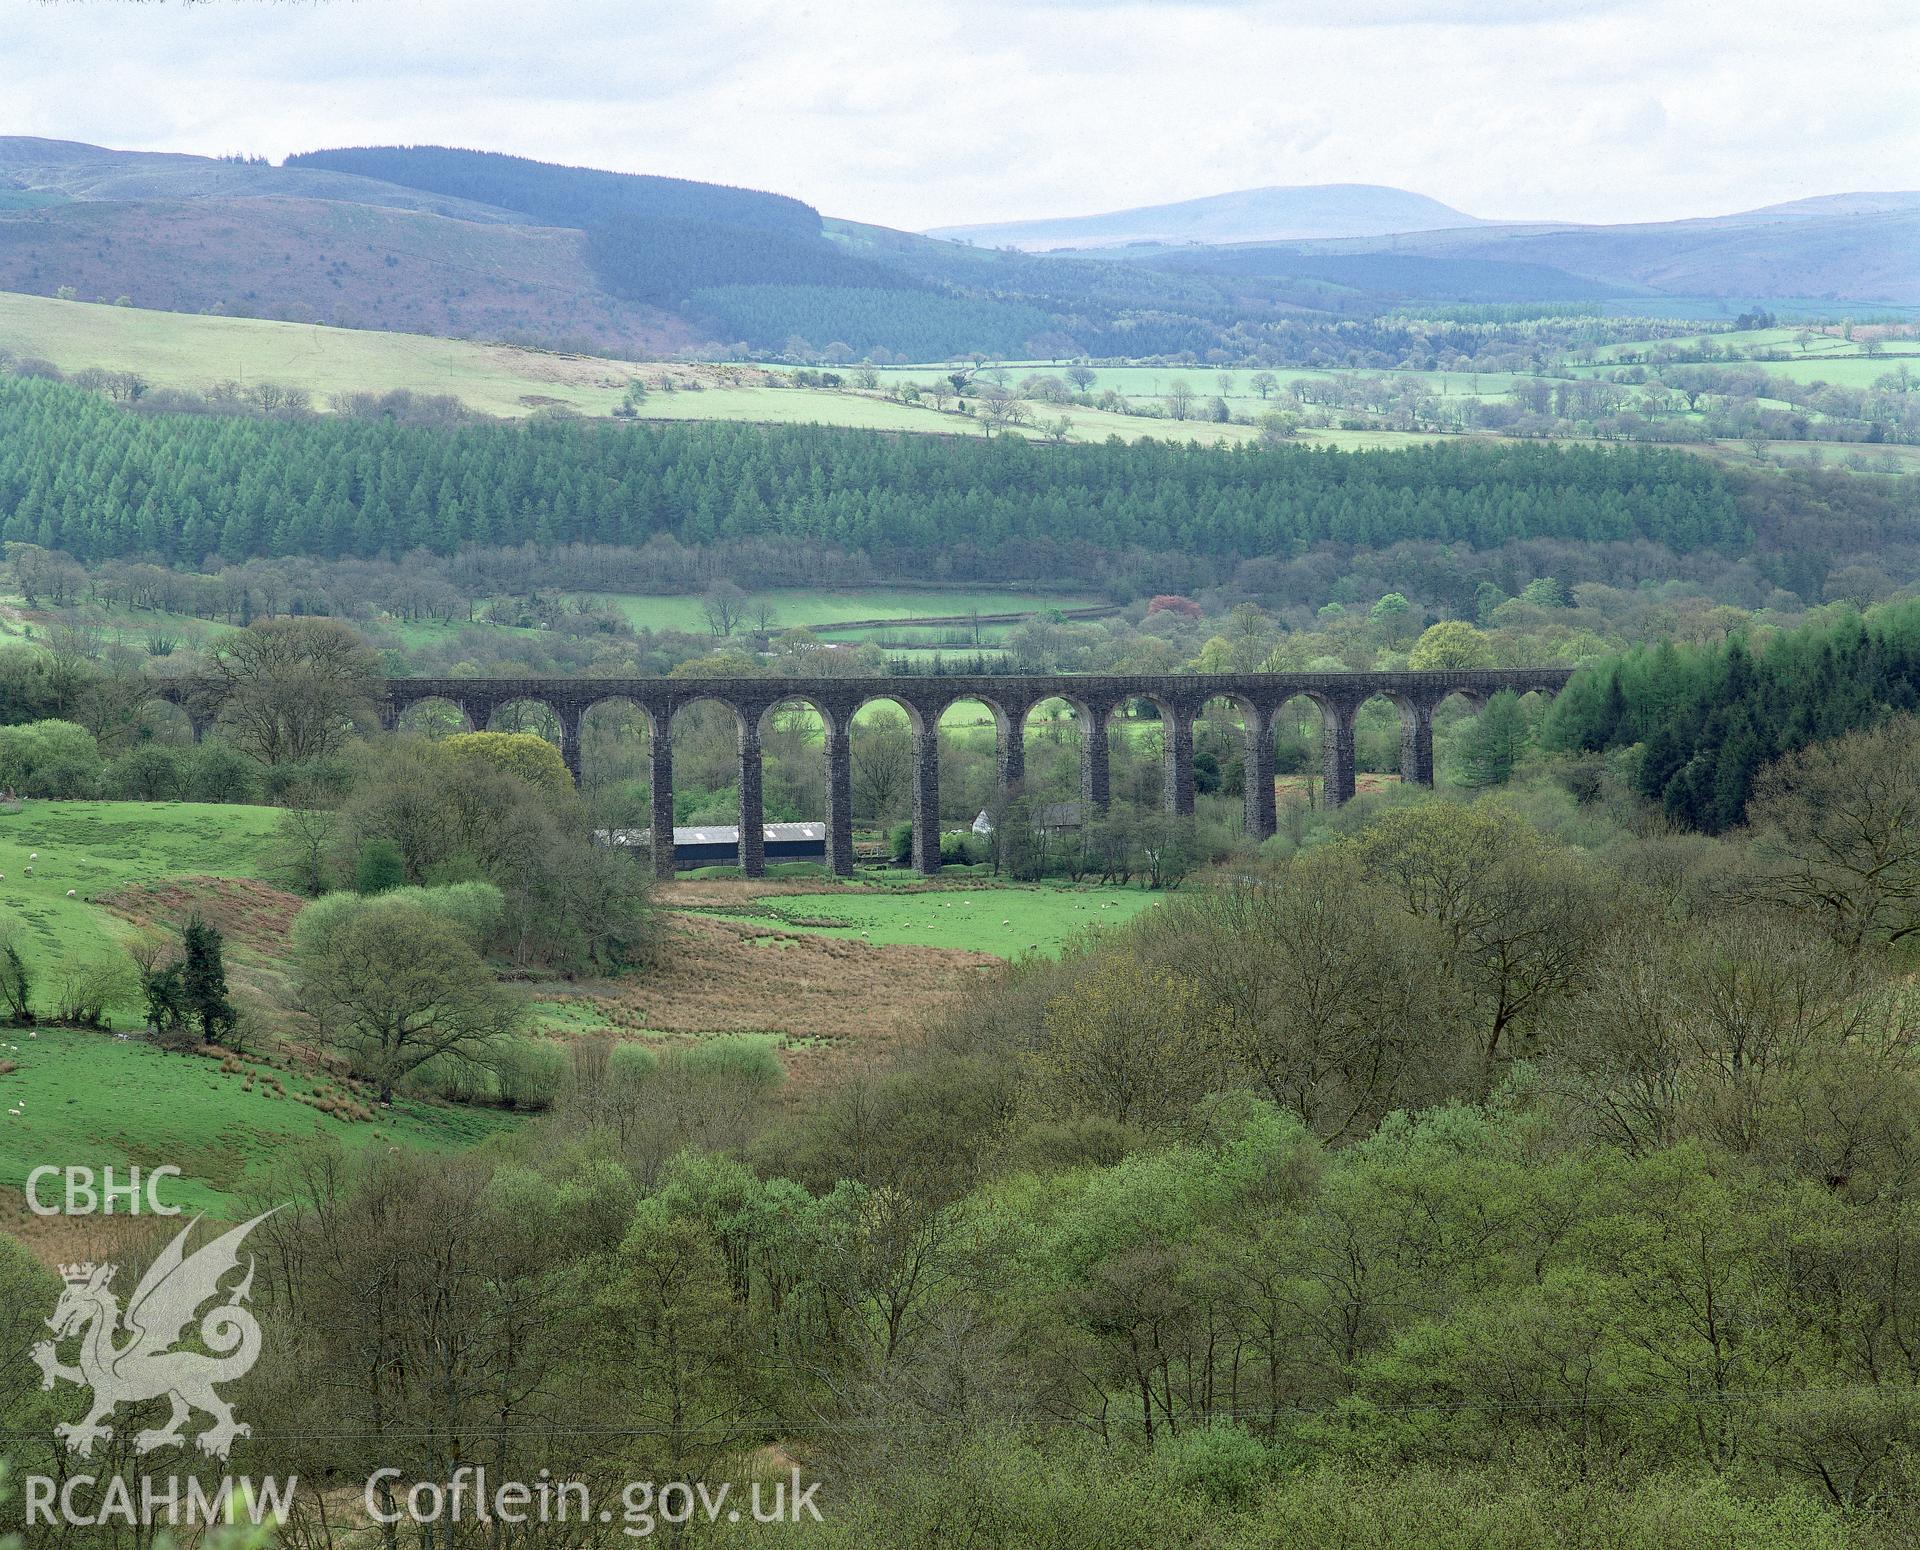 RCAHMW colour transparency showing landscape view of Cynghordy Viaduct.